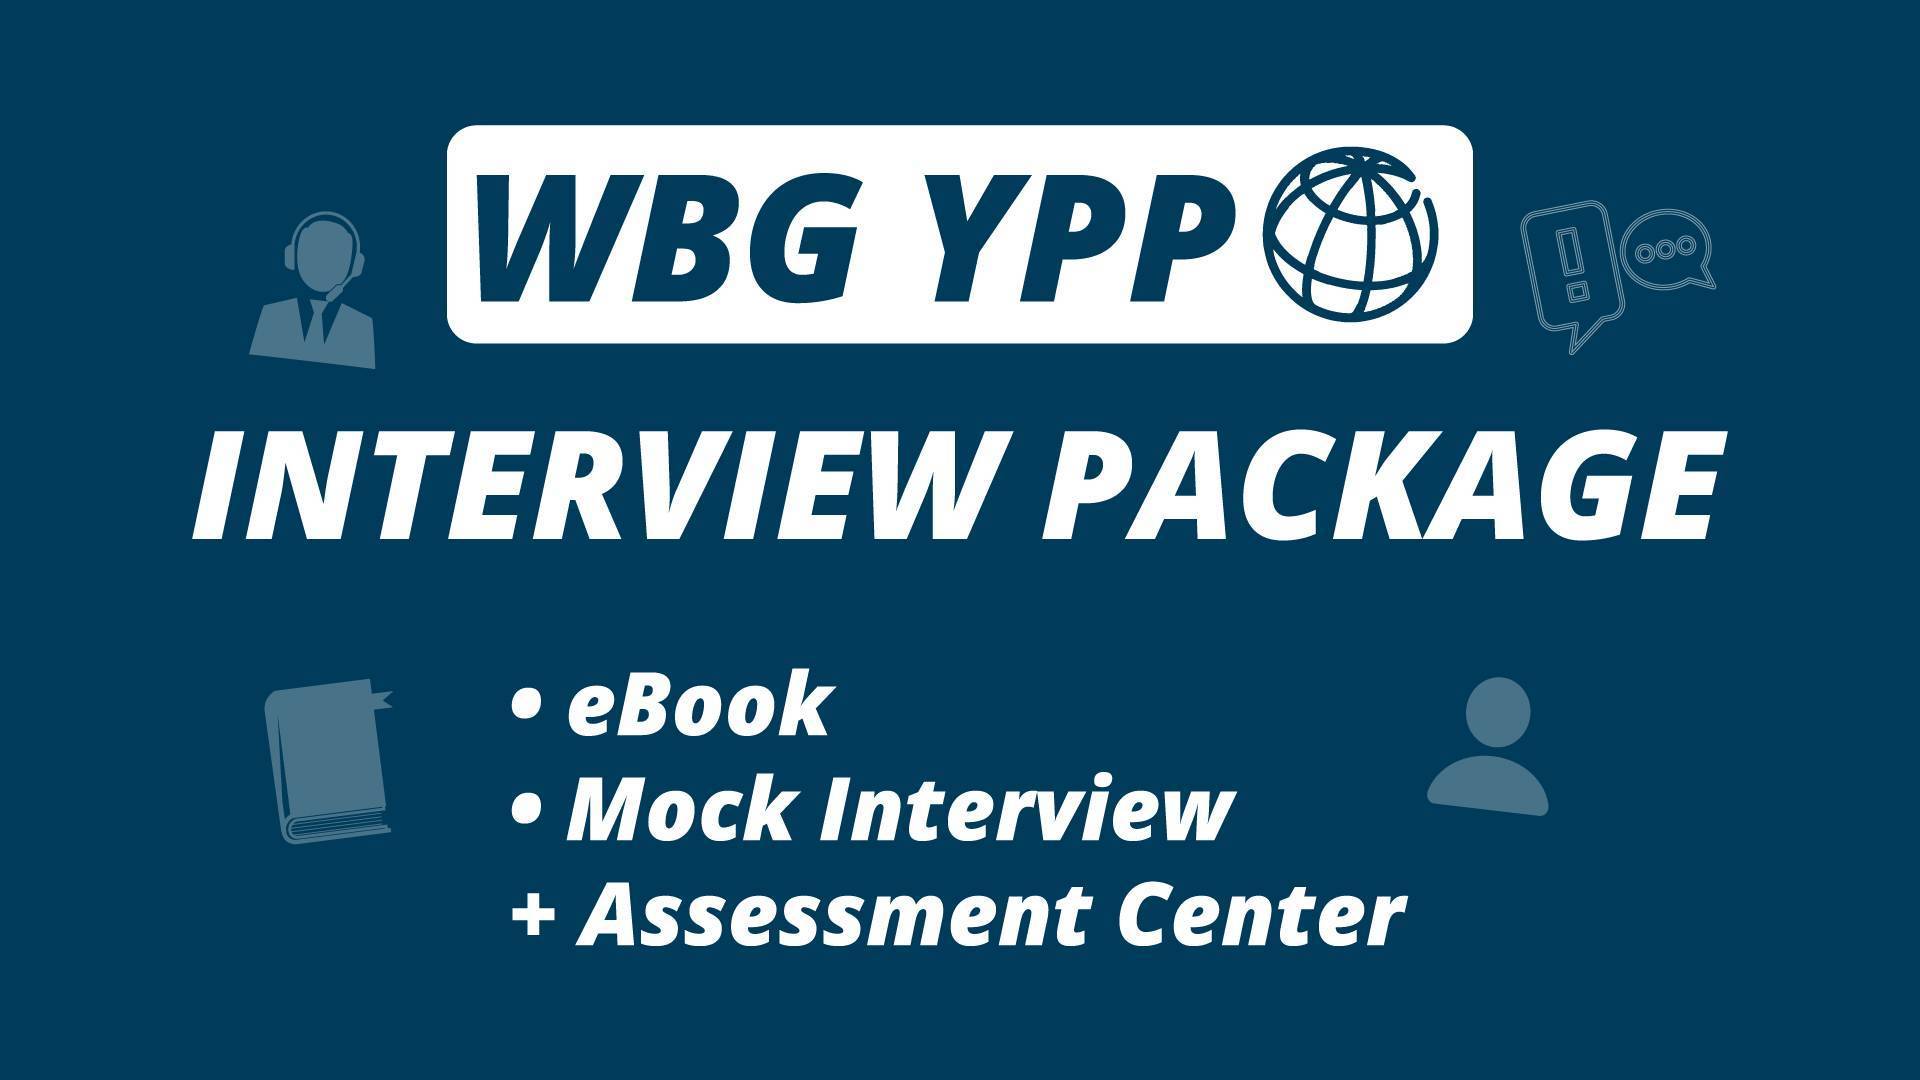 WBGYPP-Interview-Package